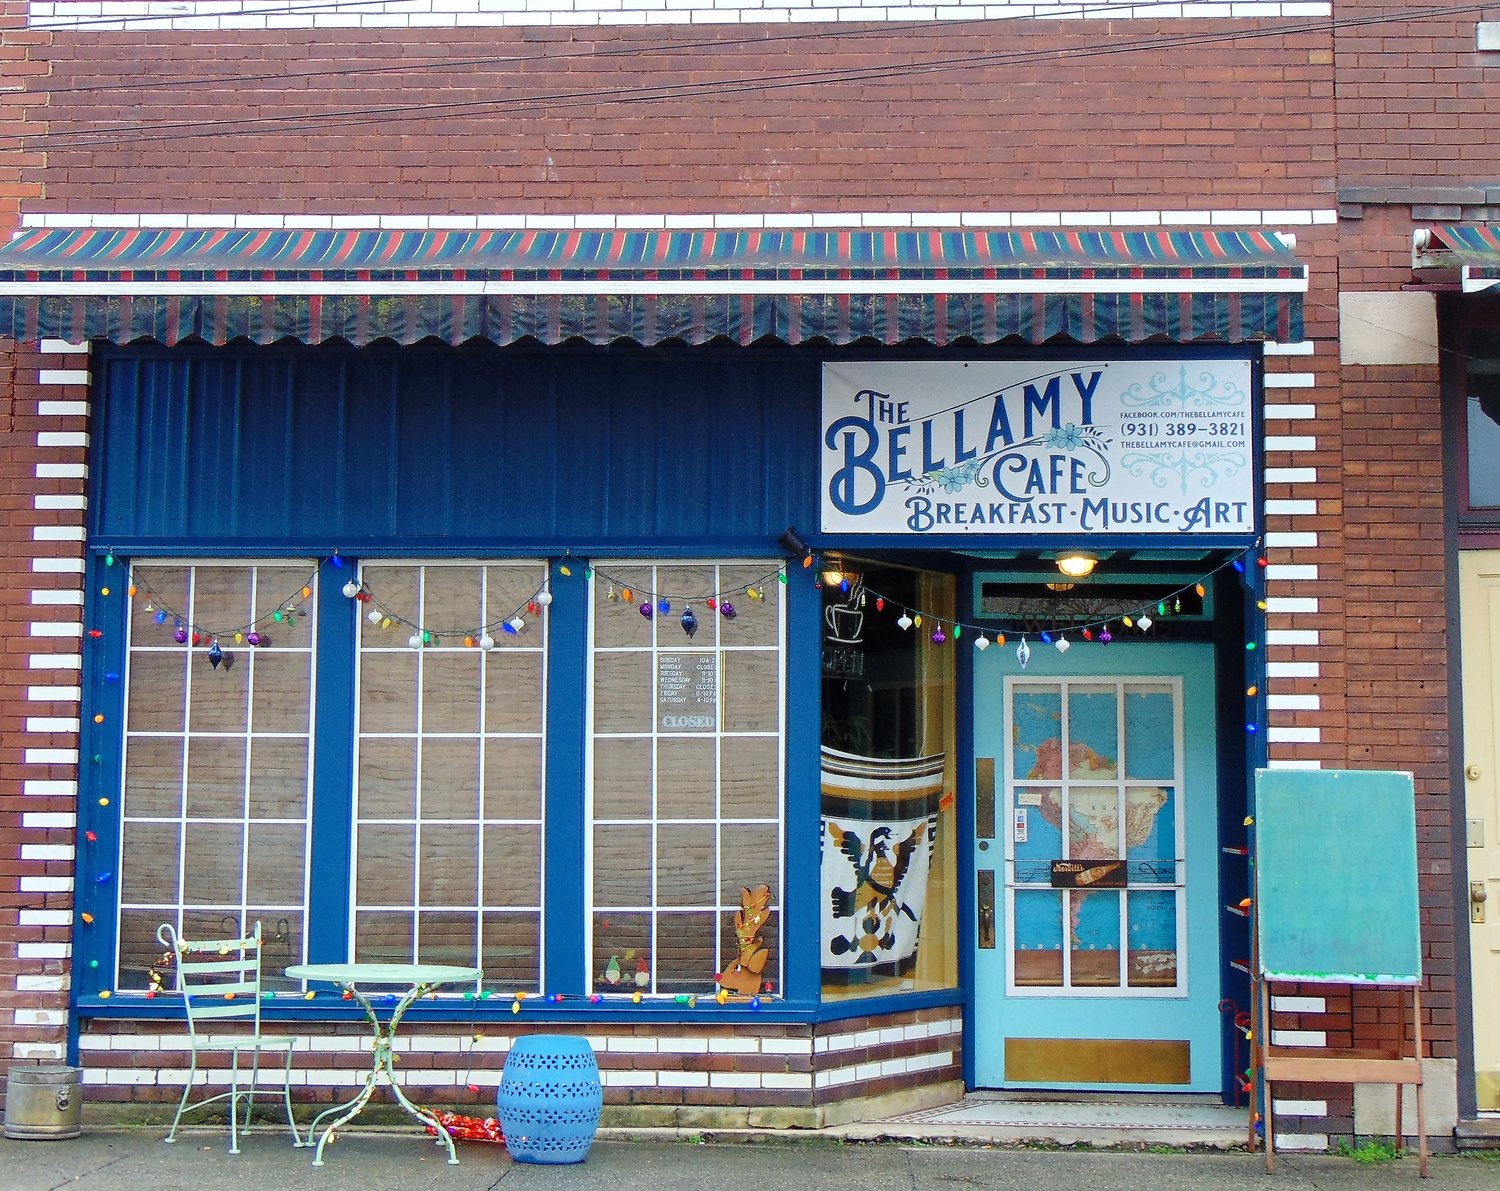 Eric Sewell and Dani Beck say they’re living a dream as new owners of The Bellamy
Café on Main Street in Wartrace. The cafe’s name came to Sewell last year. The root
word of “Bellamy” means “friend.” He says that stuck and certainly fits the atmosphere of their venue.